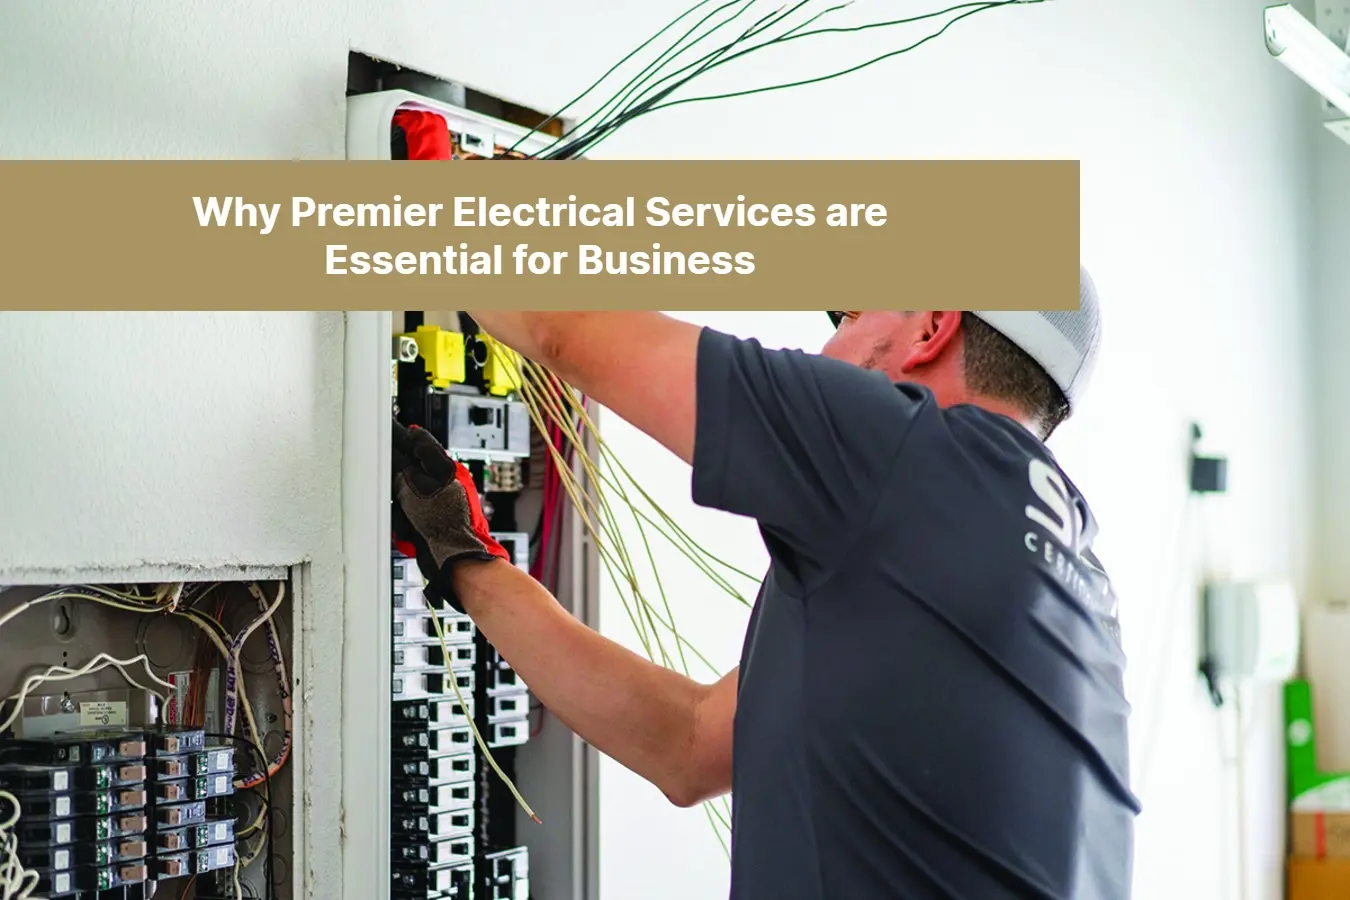 Why Premier Electrical Services are Essential for Business